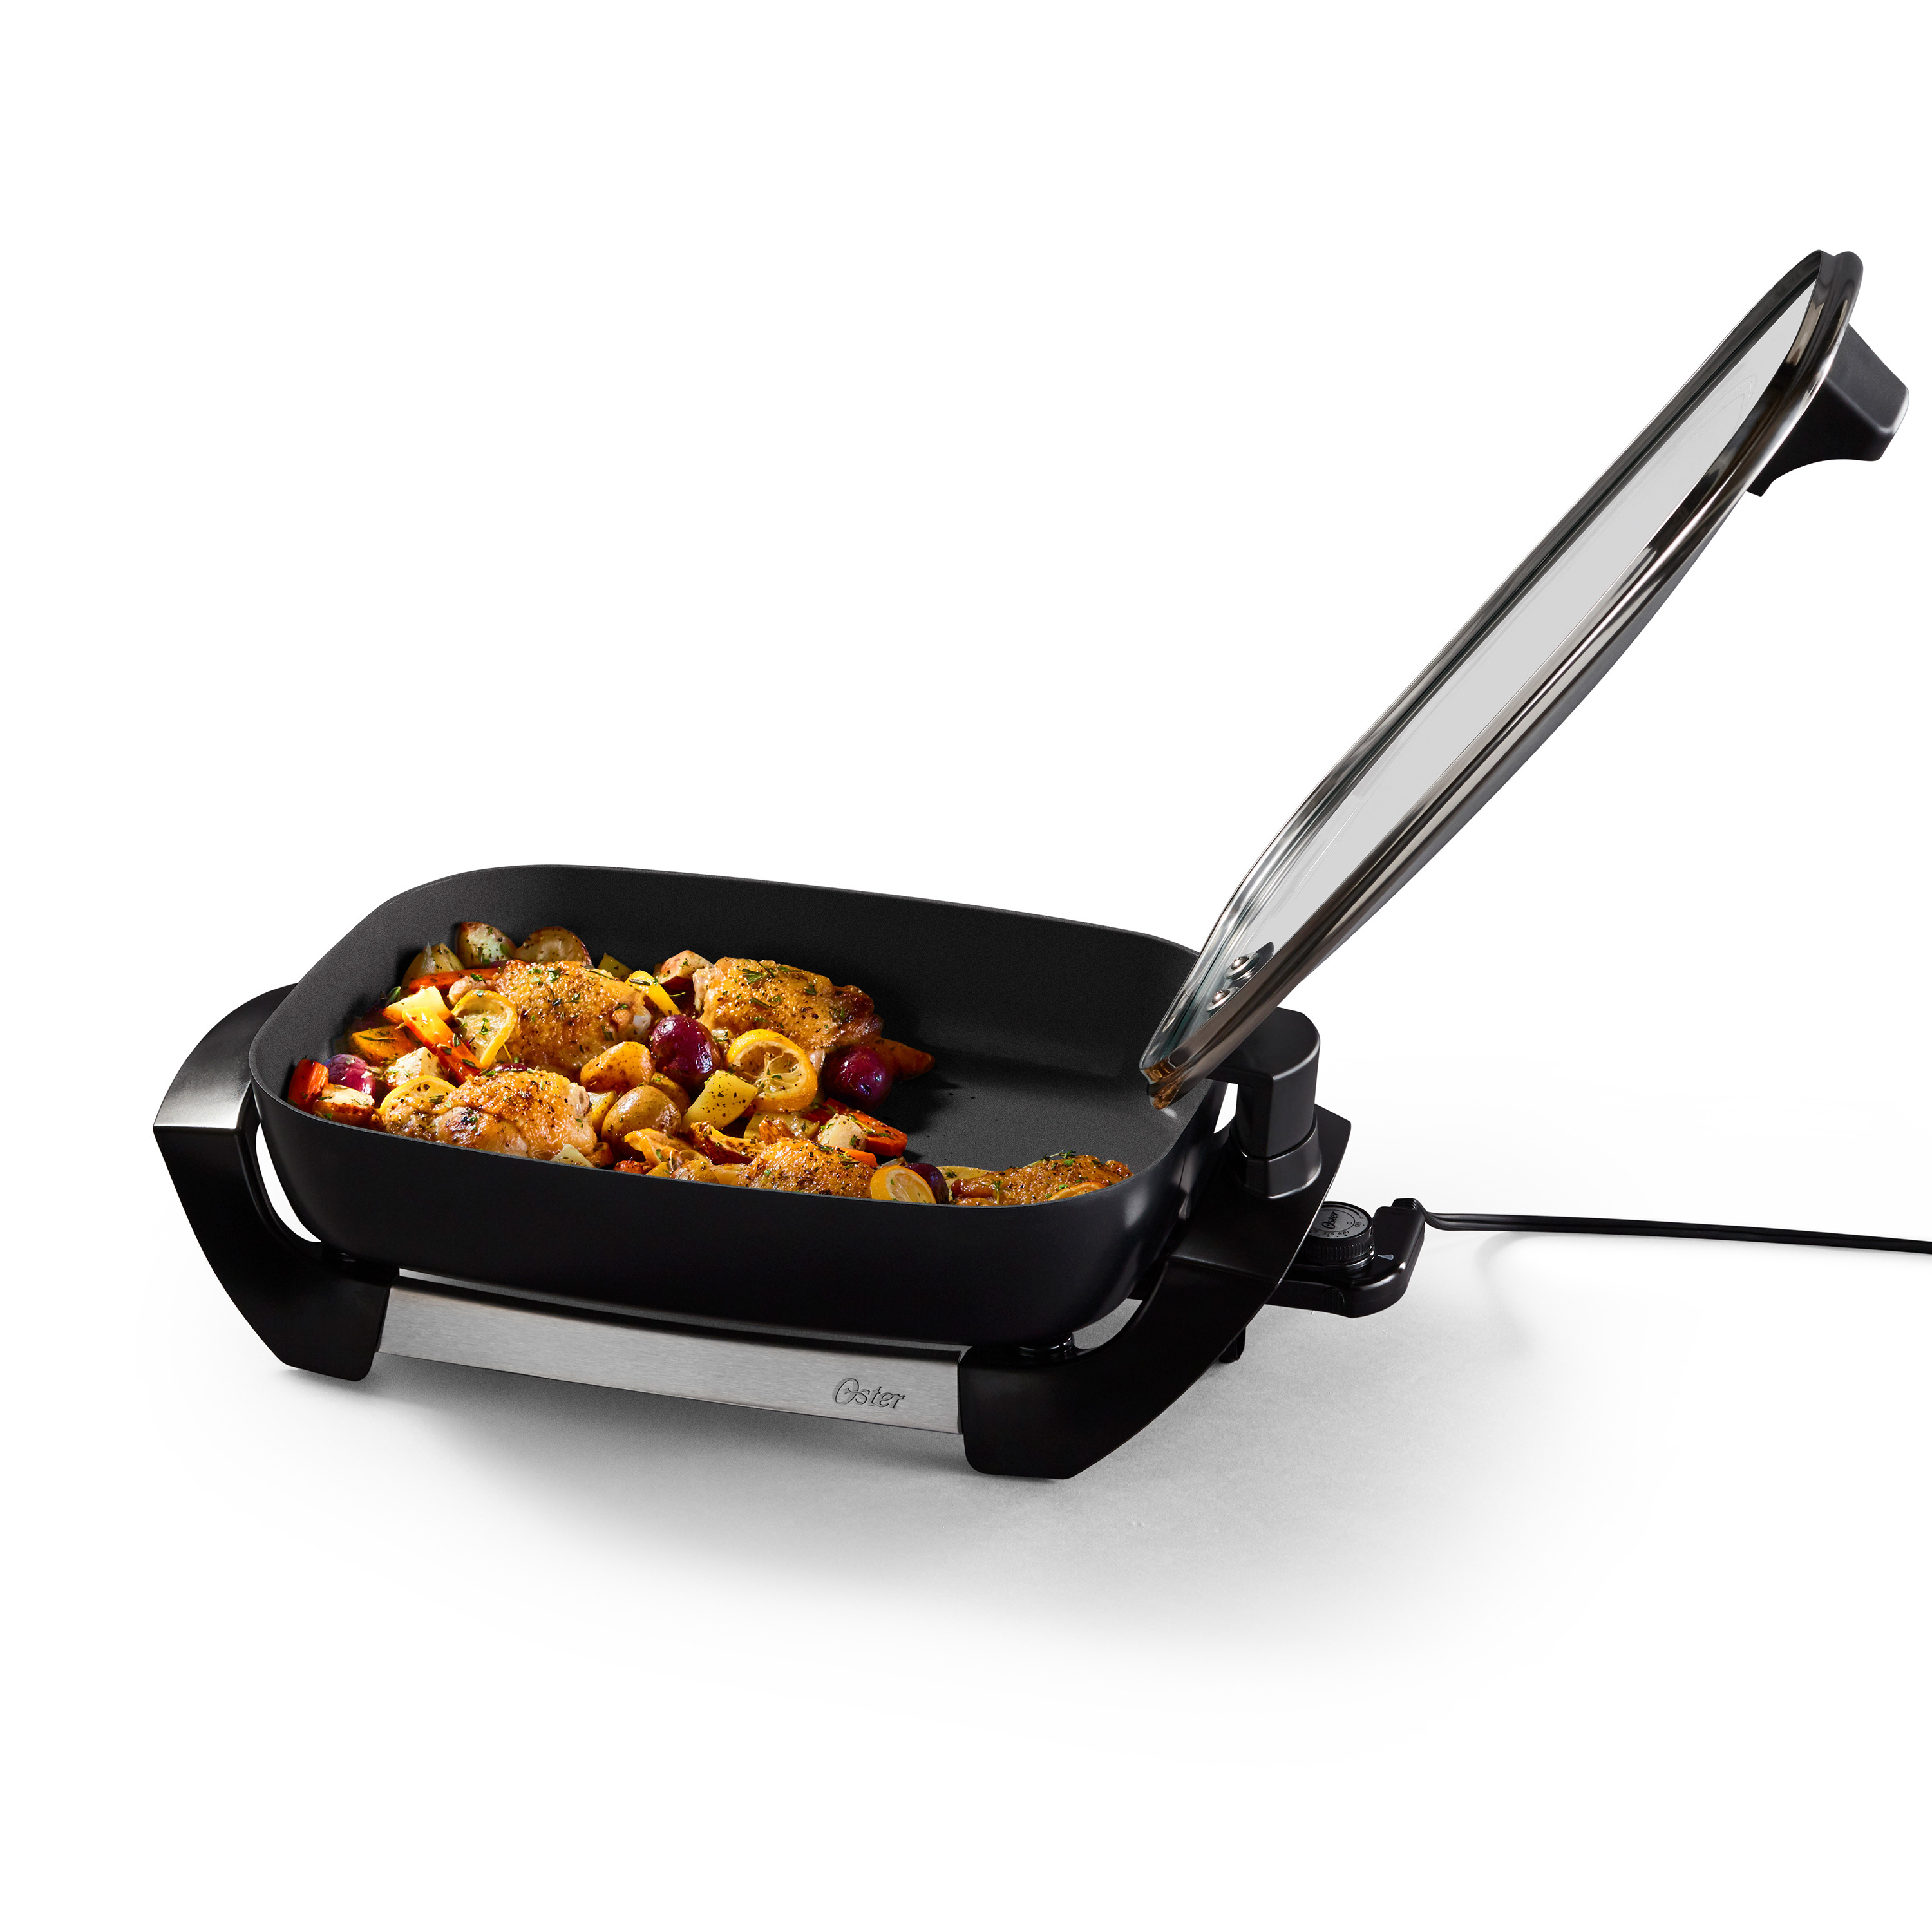 Oster DiamondForce 12-in x 16-in Nonstick Electric Skillet with Hinged Lid, Black - image 1 of 11